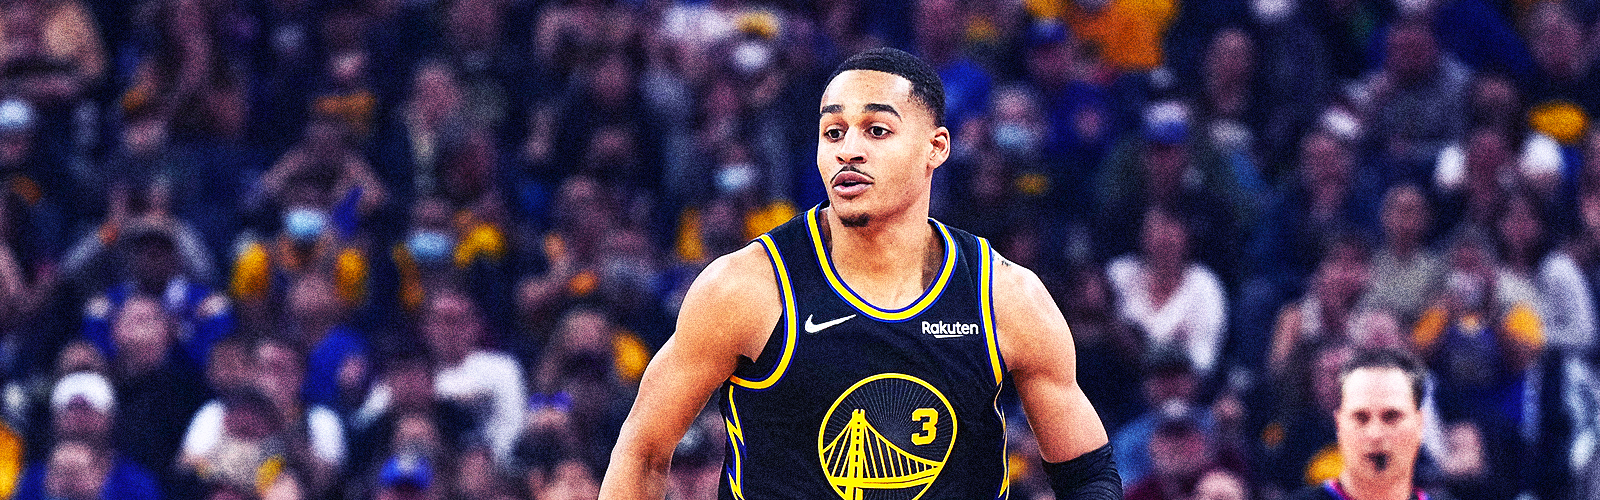 Jordan Poole Got A Ring, A Bag, And Out Of A Toxic Relationship - NBA Fan  Describes How The Ex-Warriors Star Had A Perfect Exit